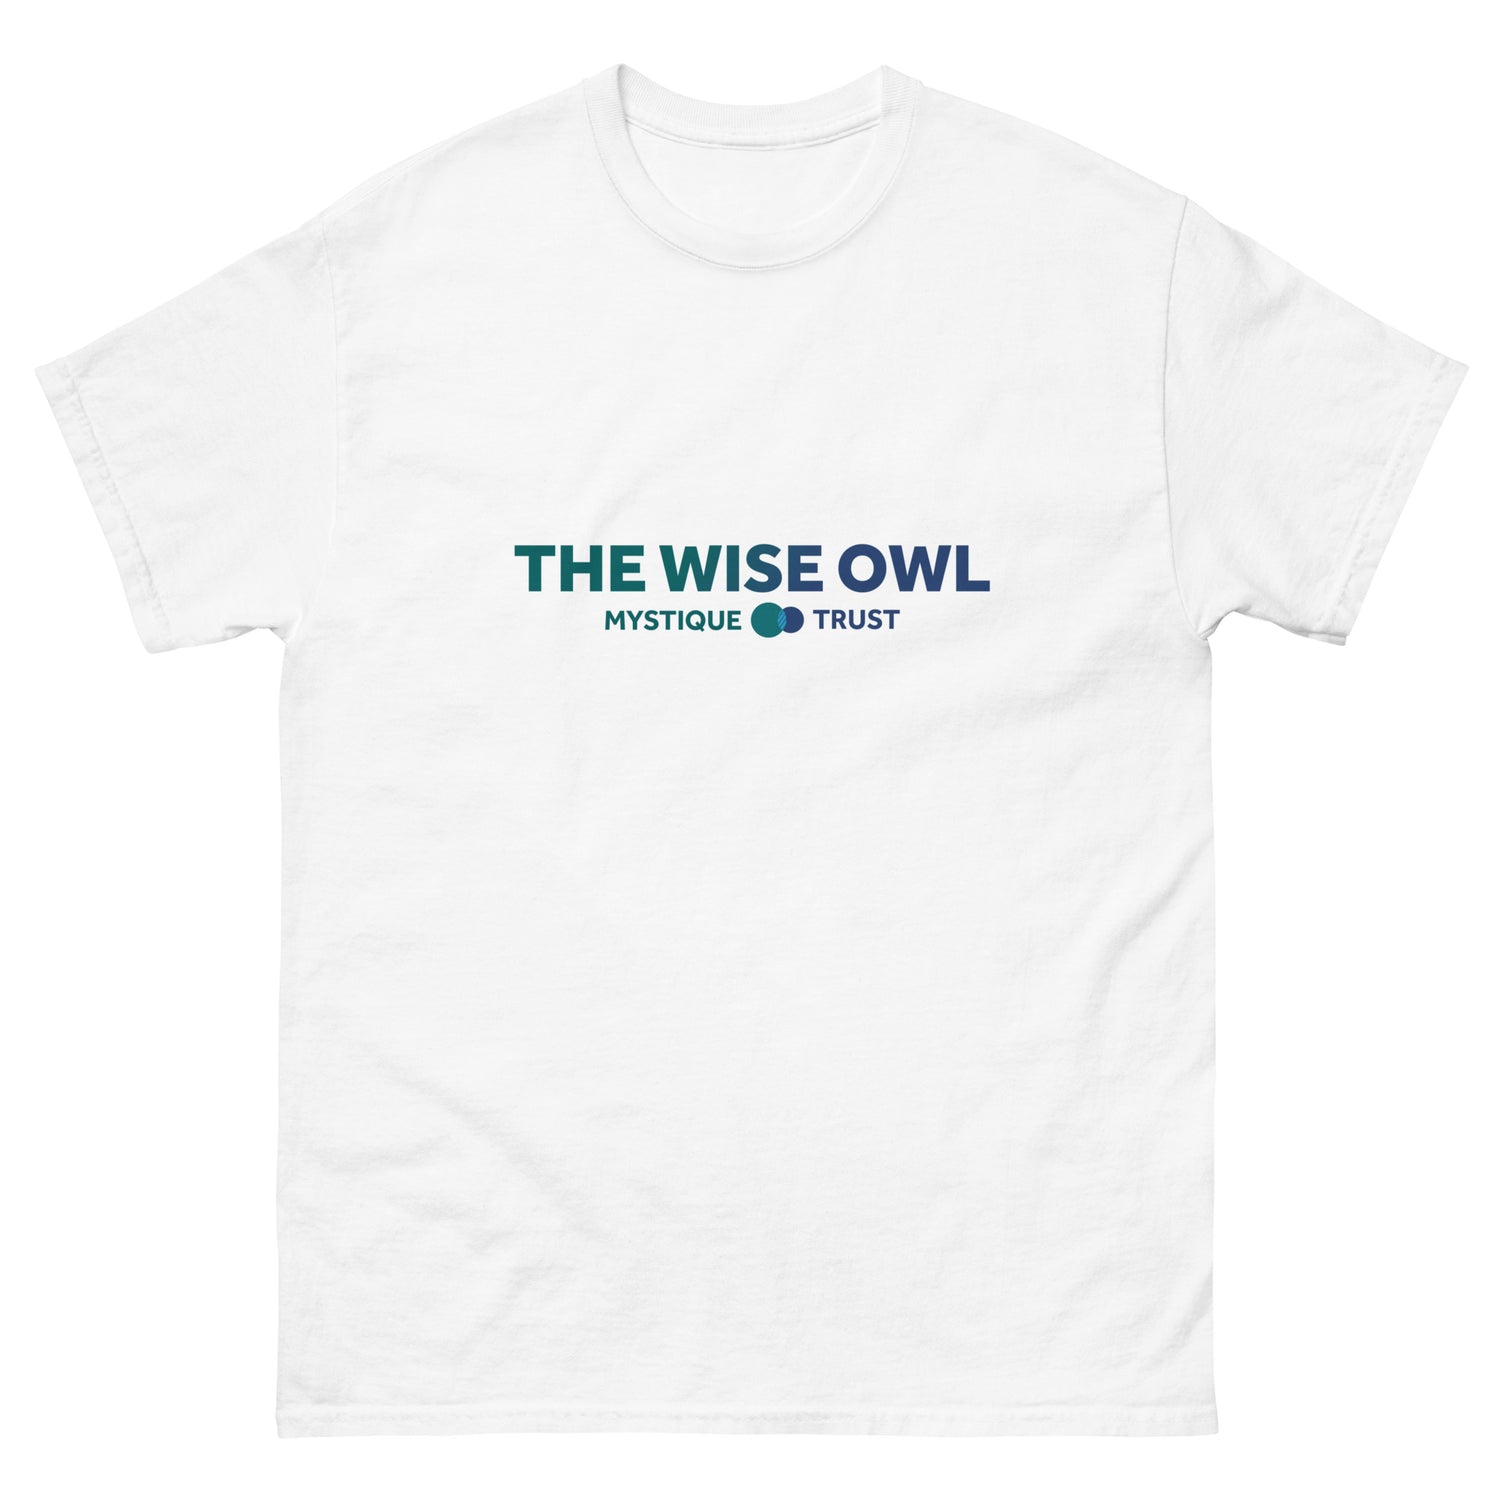 The Wise Owl